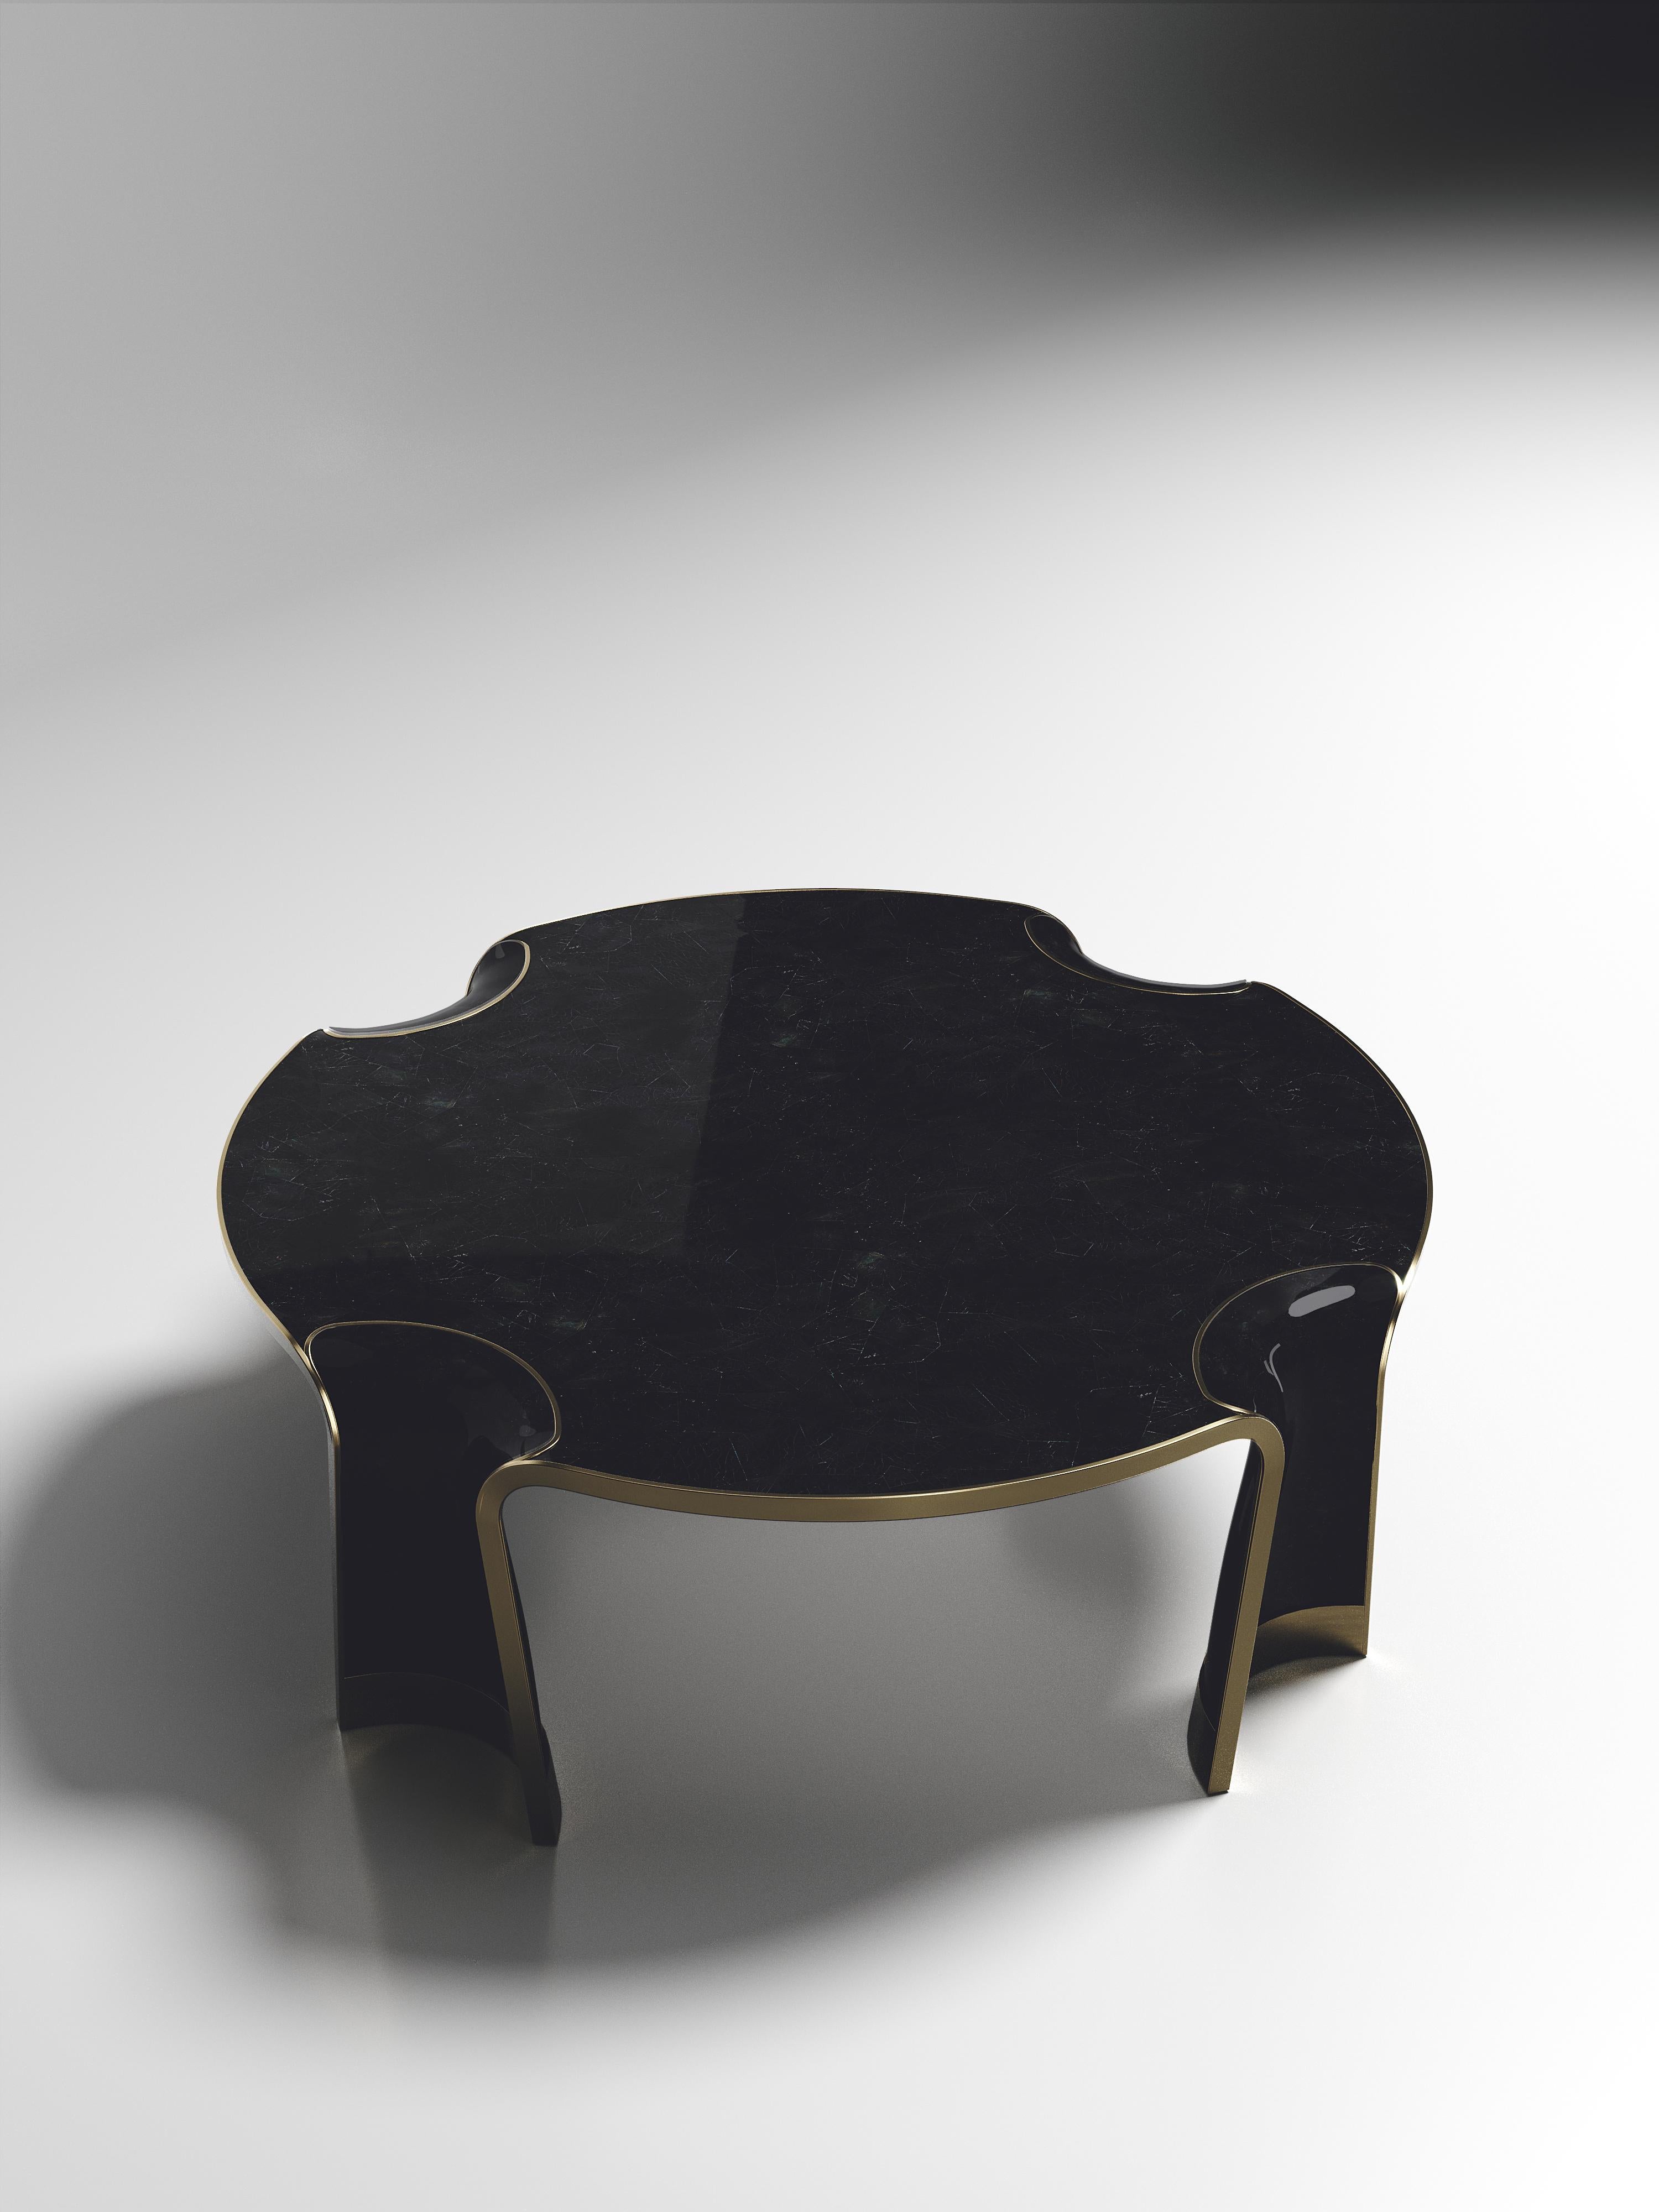 The Nymphea round coffee by R & Y Augousti in pen shell with bronze-patina brass details explores the brand's iconic DNA of bringing old world artisanal craft into a contemporary and utterly luxury feel. This table is done in a black pen shell